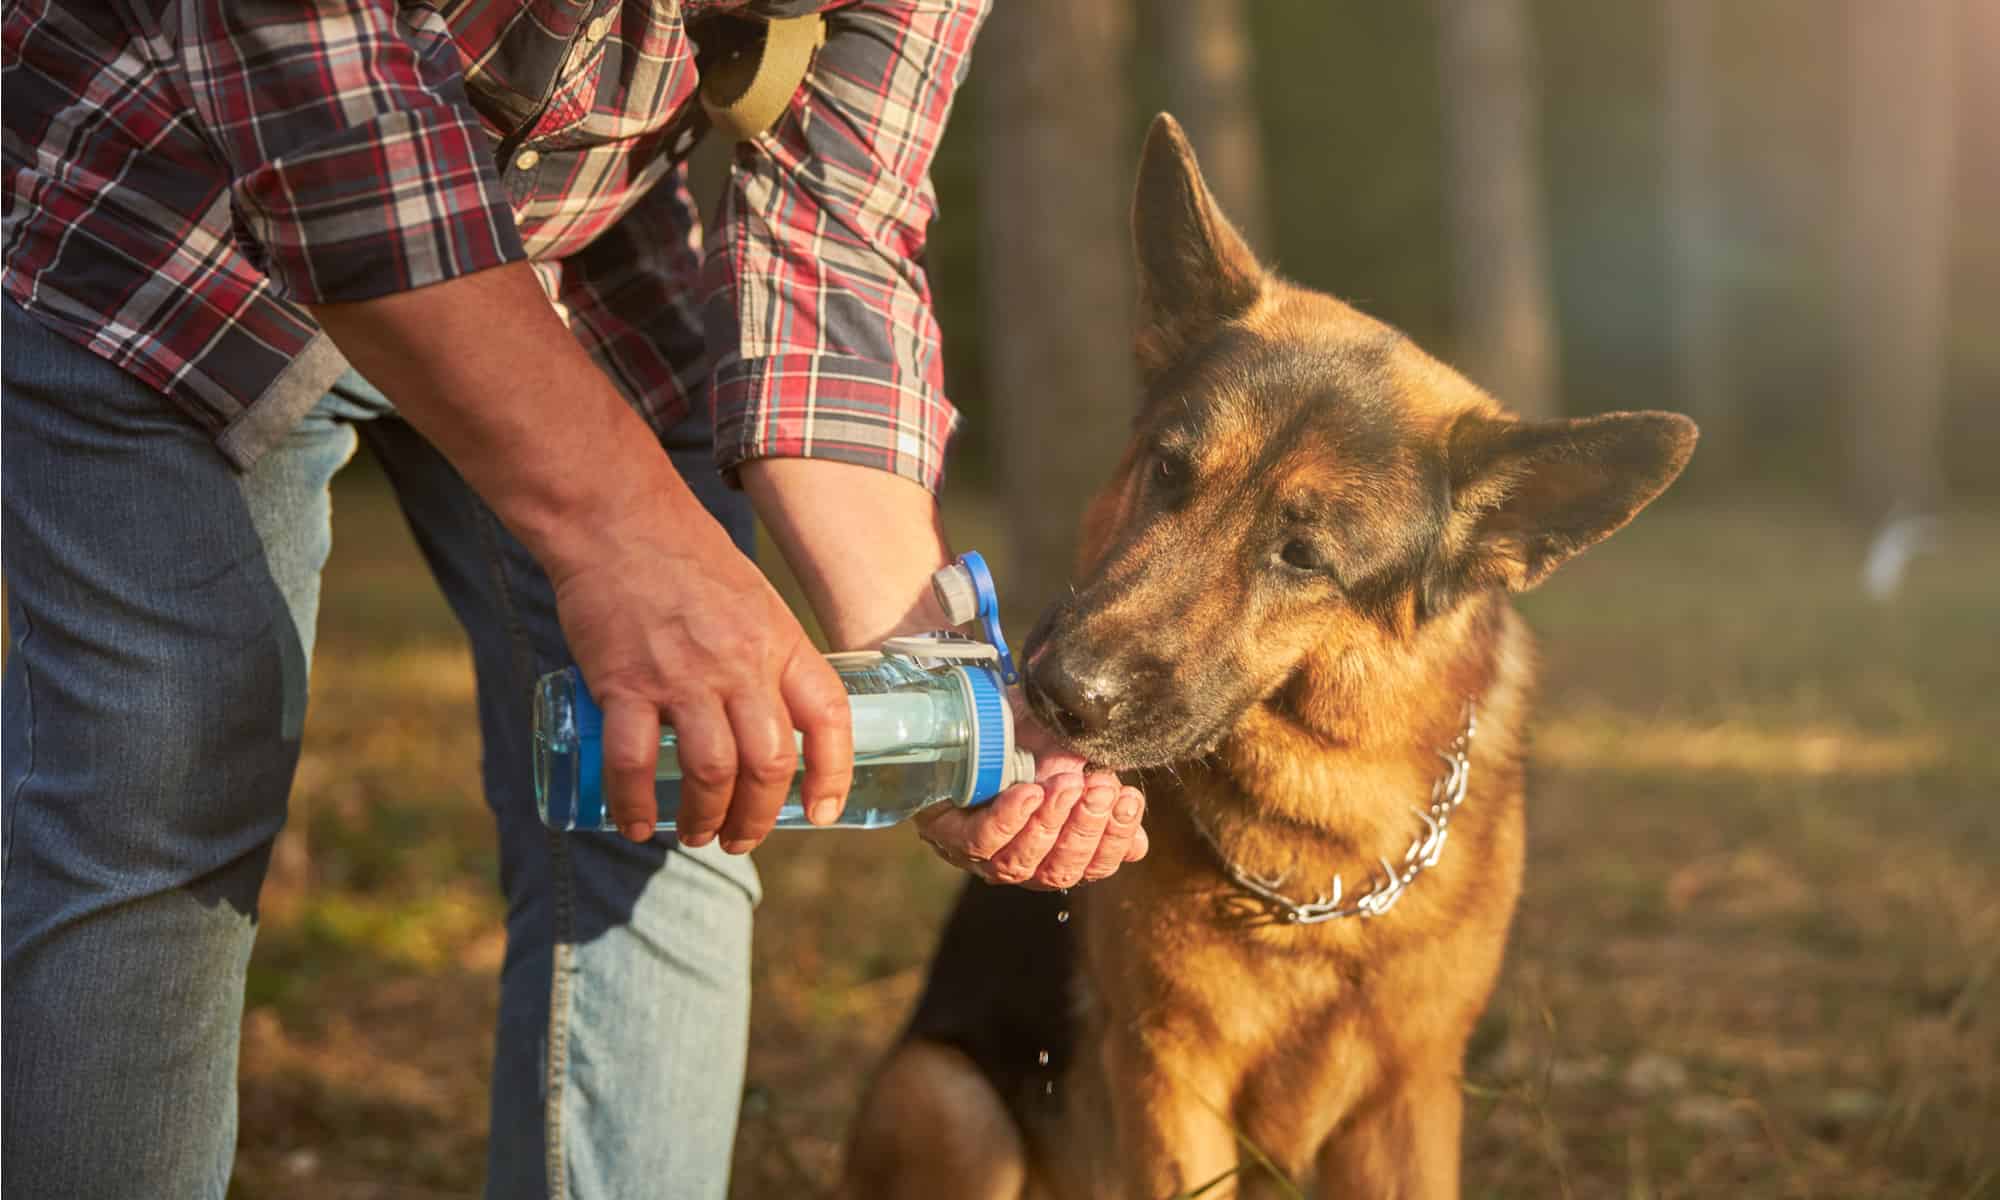 how much water should a dog drink